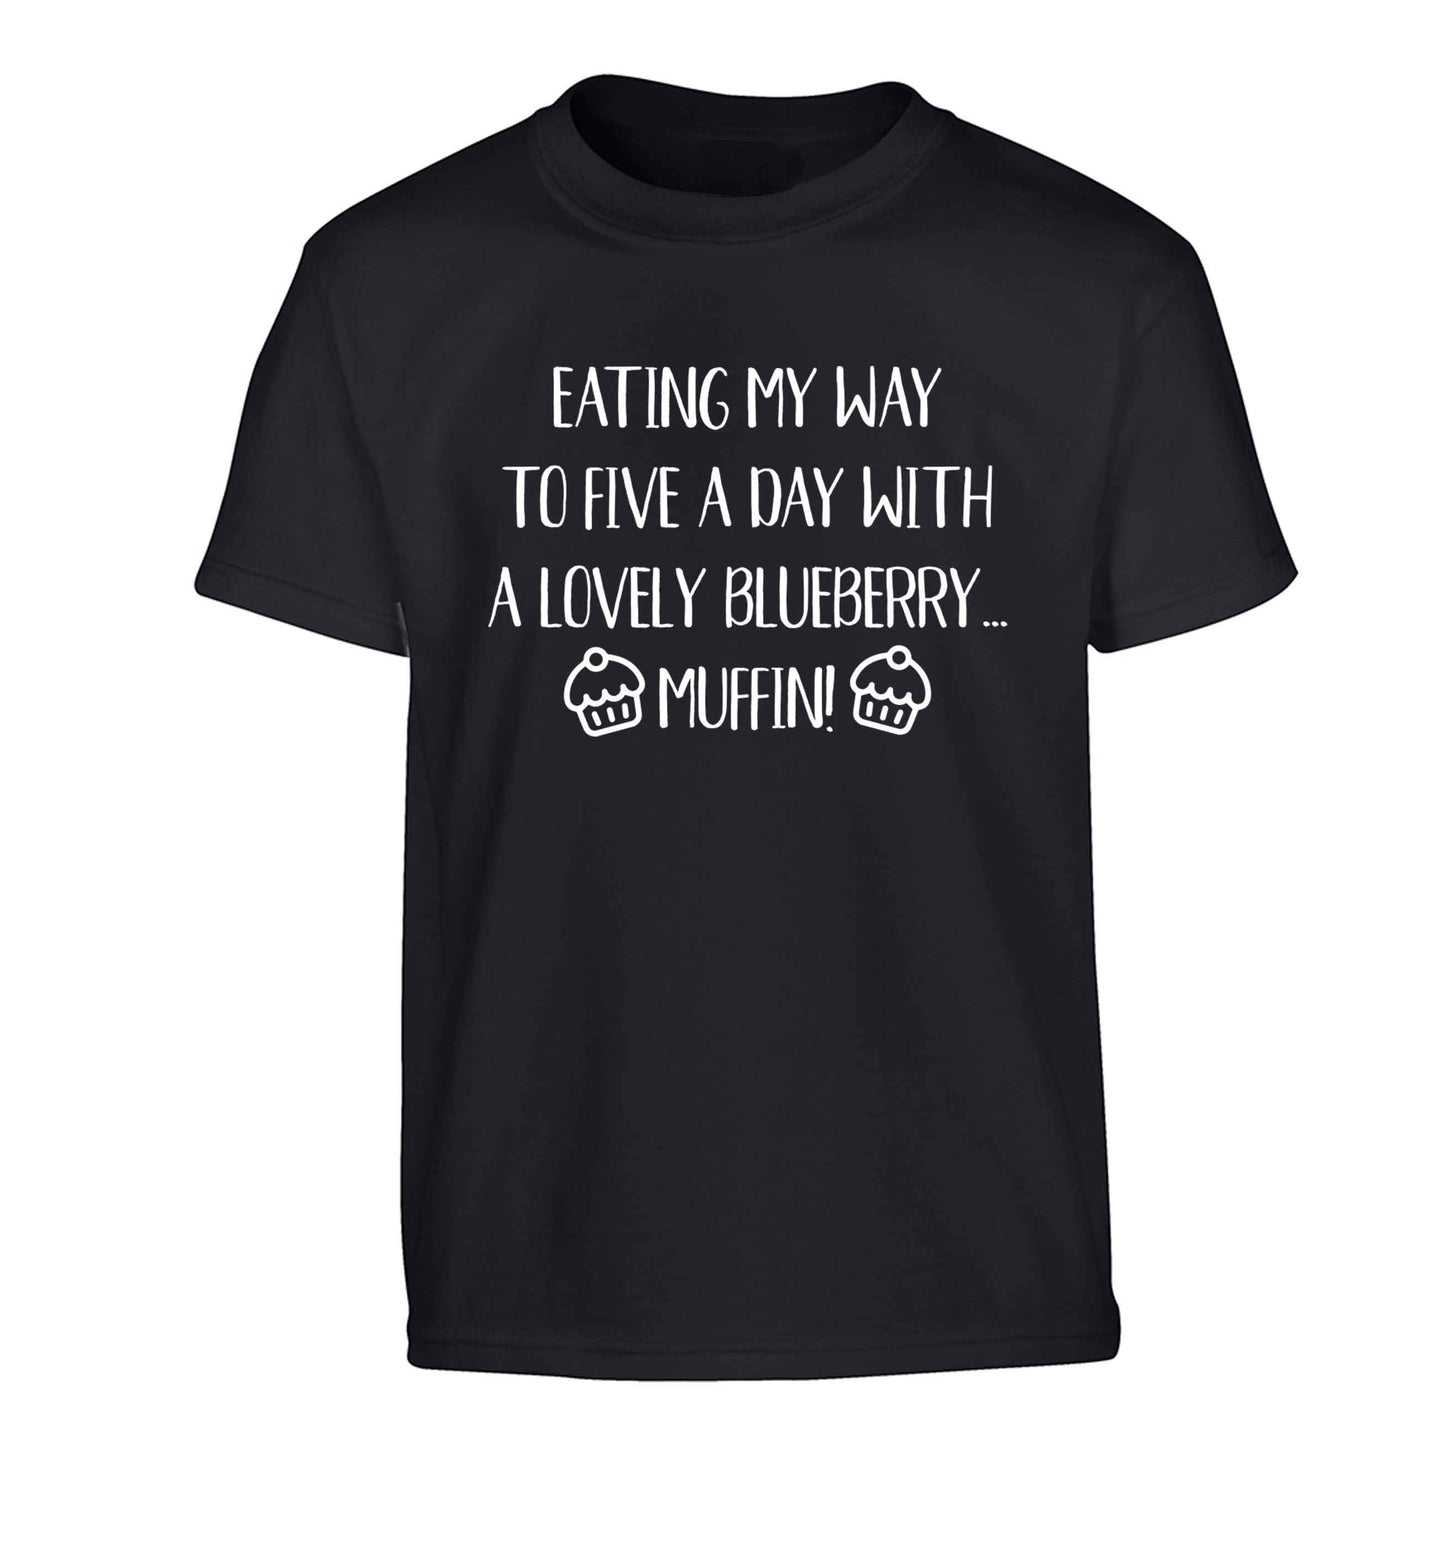 Eating my way to five a day with a lovely blueberry muffin Children's black Tshirt 12-13 Years